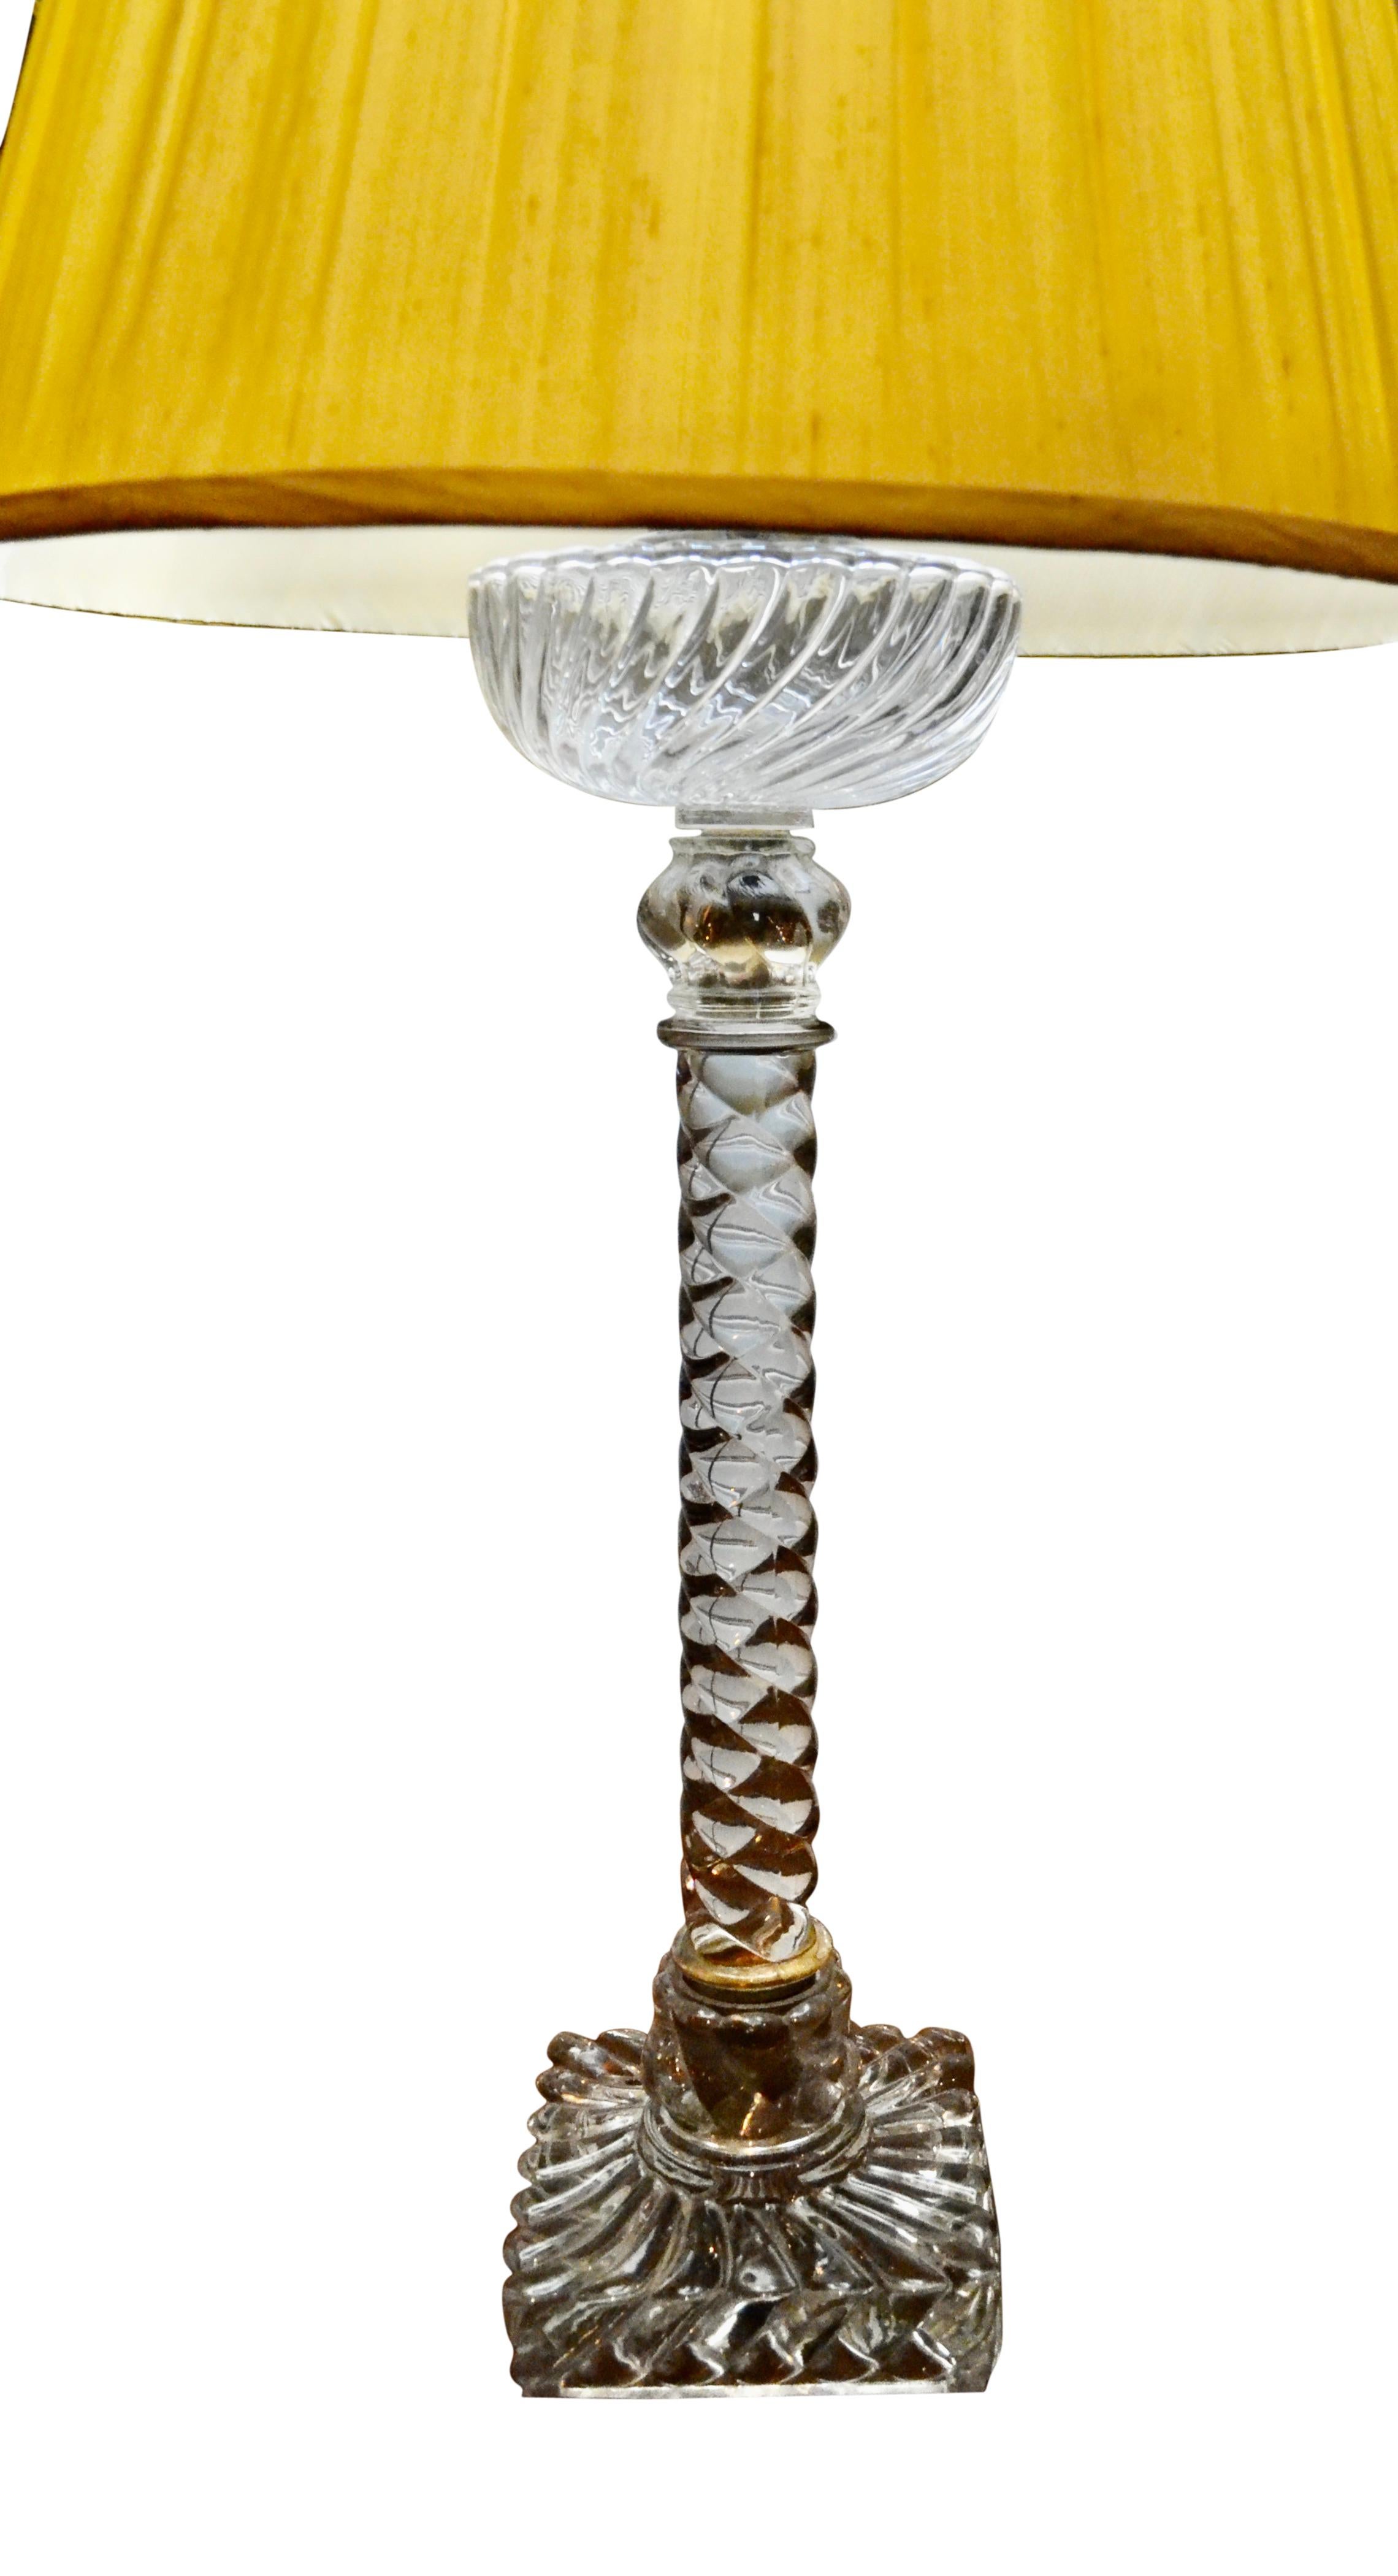 A late 19th century French crystal lamp by the famous Paris Baccarat company in the design referred to as 'rope twist'. There are five crystal components that make up the lamp. The cast crystal rectangular base supports the 'rope twist' central stem